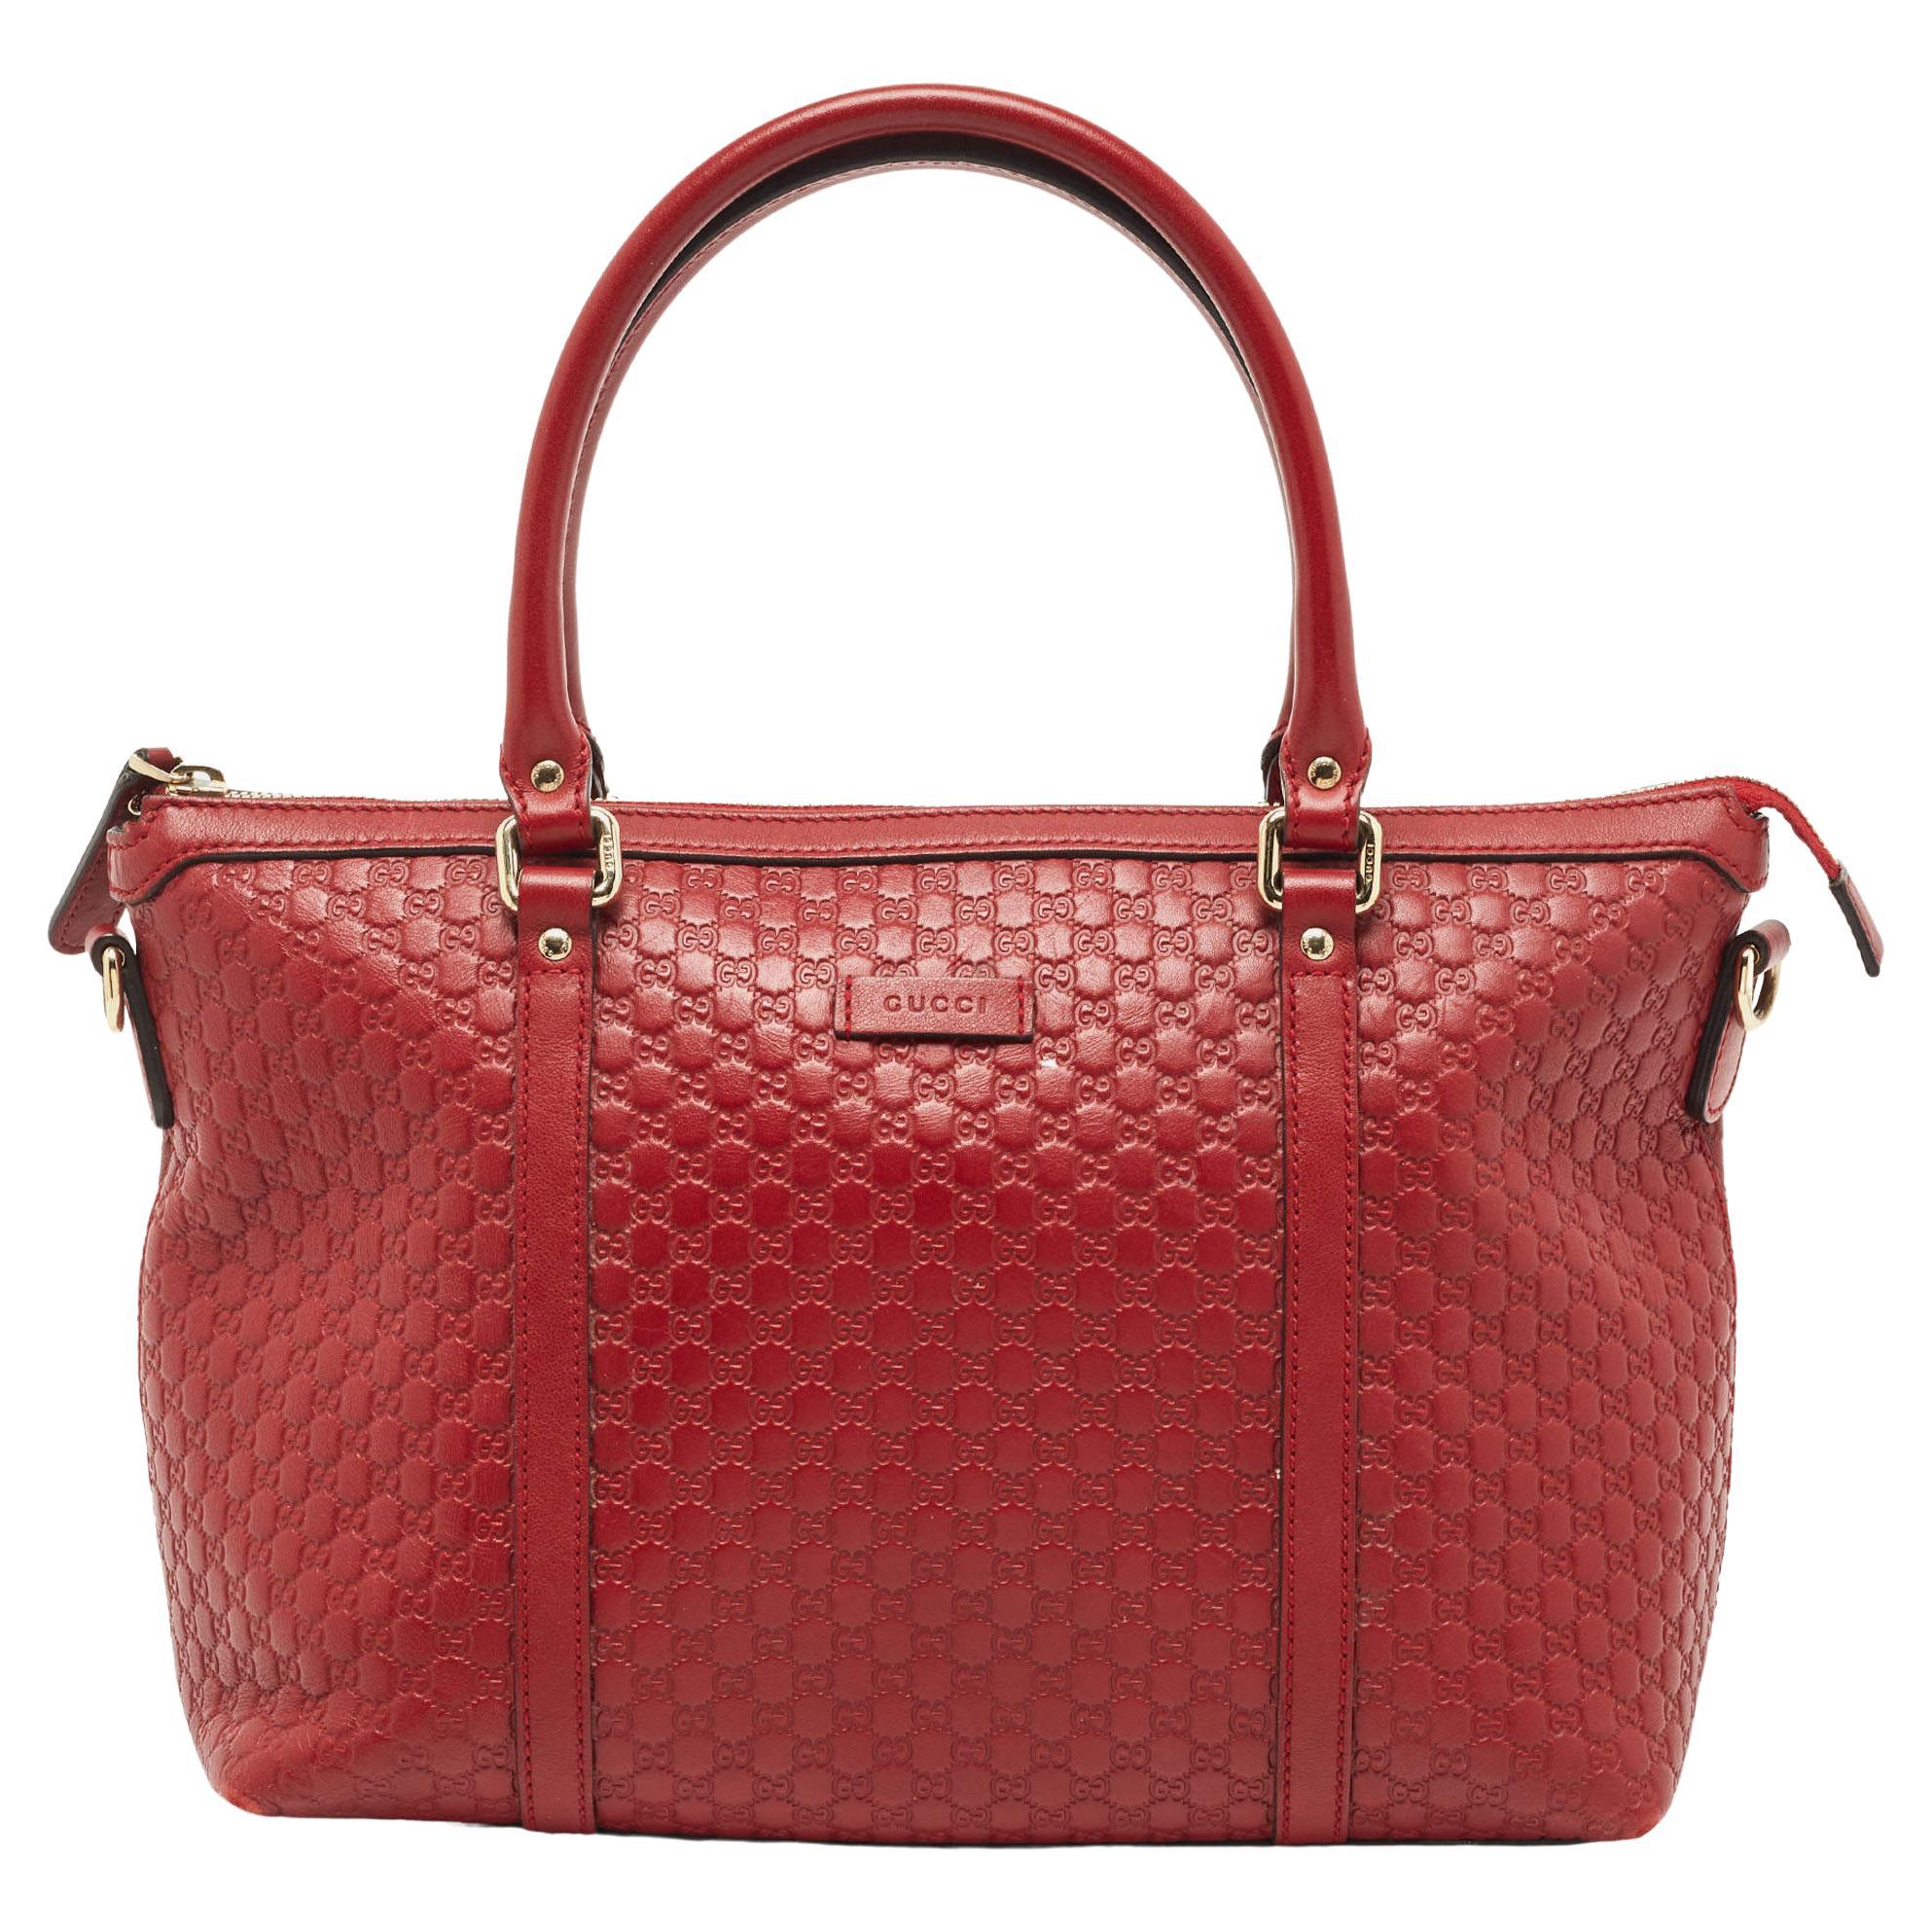 Gucci Red Microguccissima Leather Margaux Tote